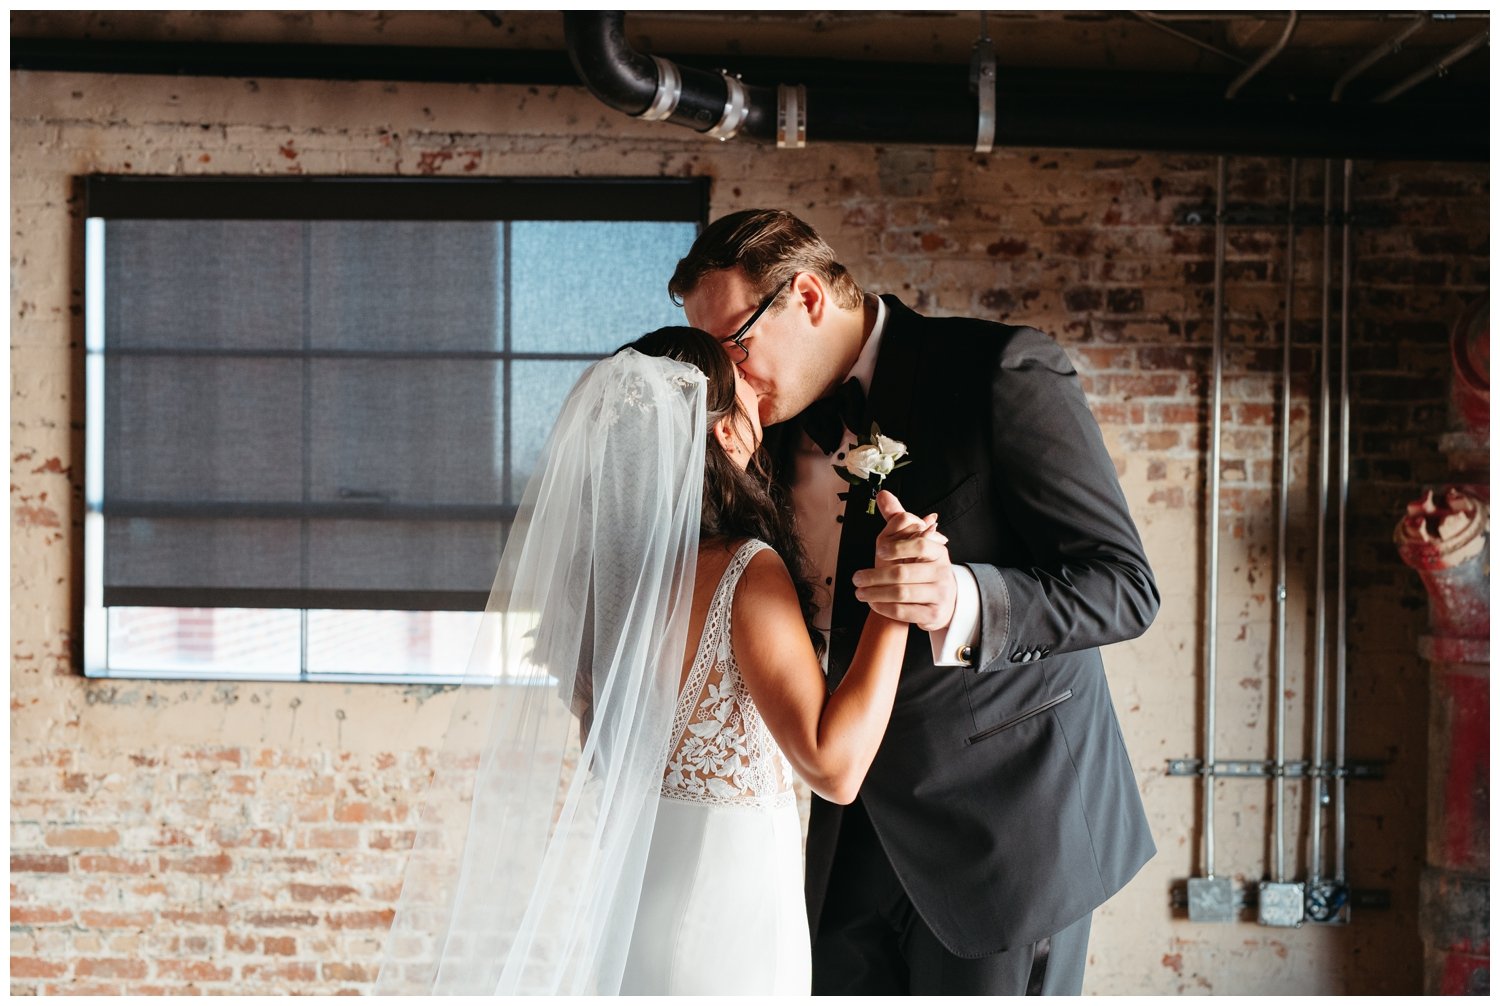 The couple kisses inside at Ponce City Market